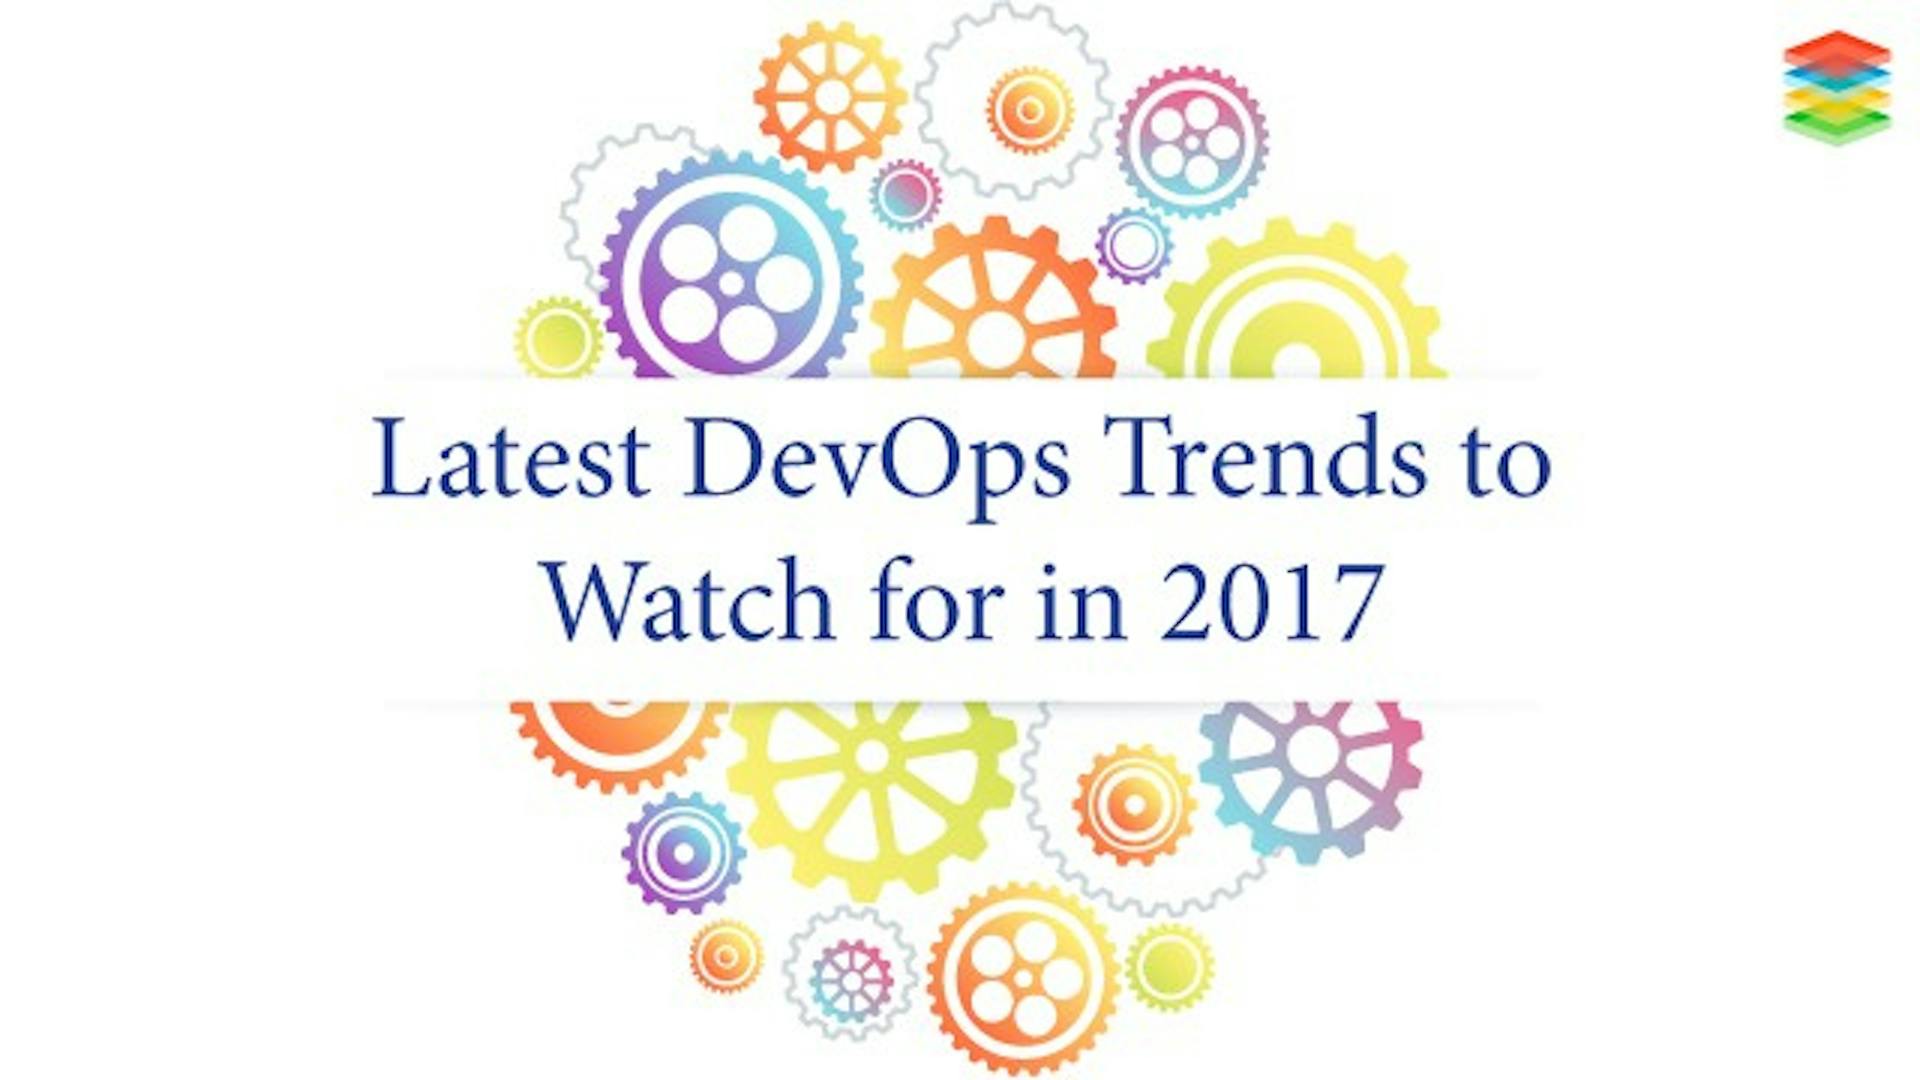 featured image - Latest DevOps Trends to Watch for in 2017